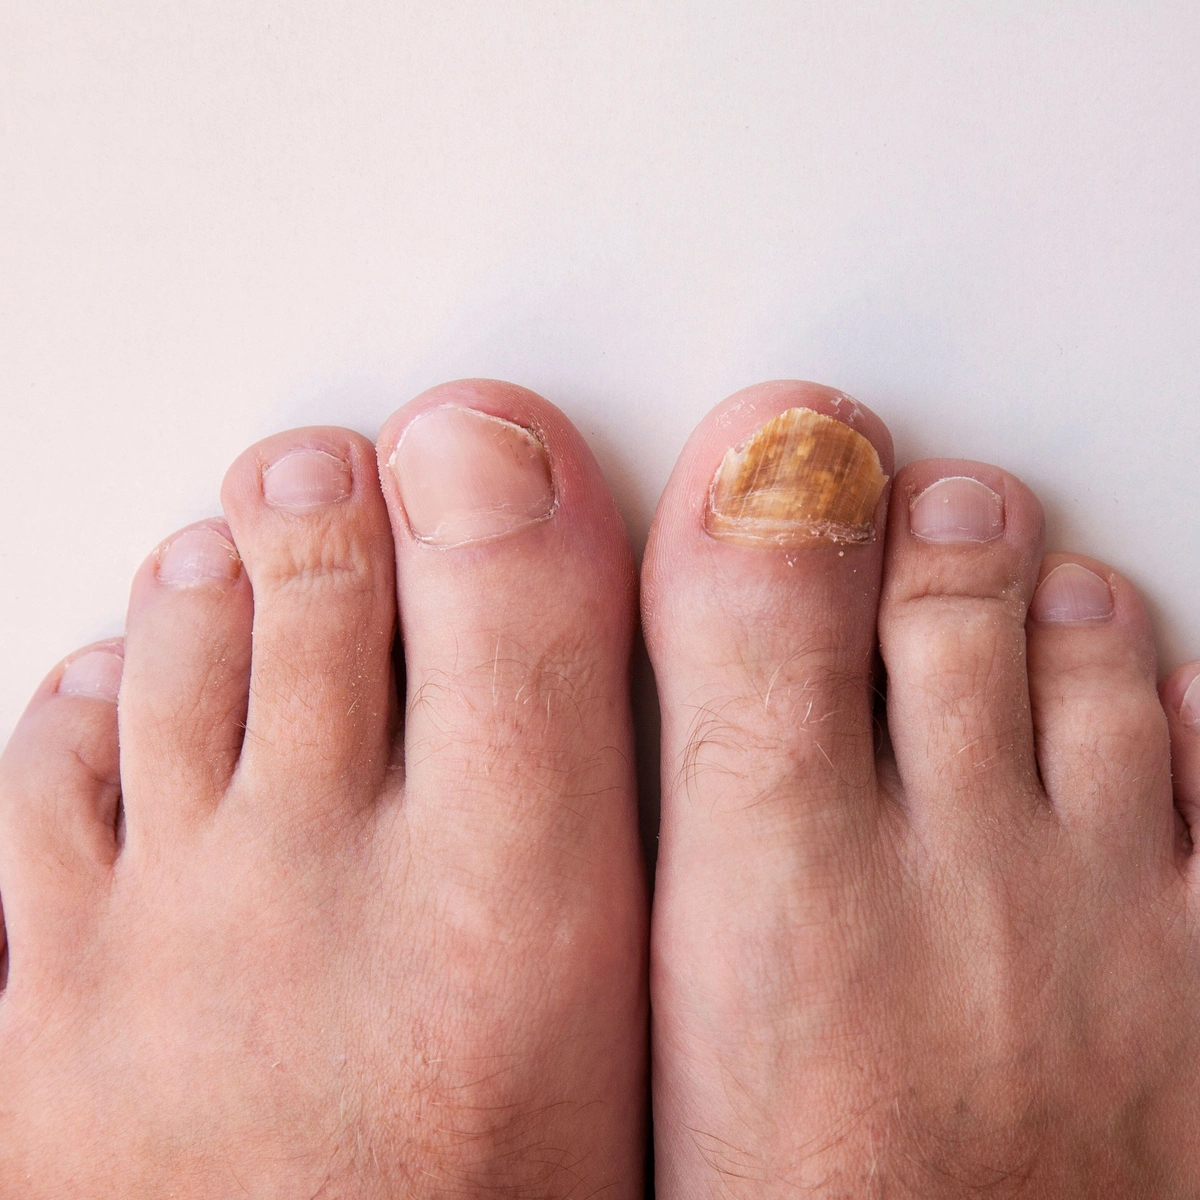 Toenail Fungus: How Does Fungus Get in There?!